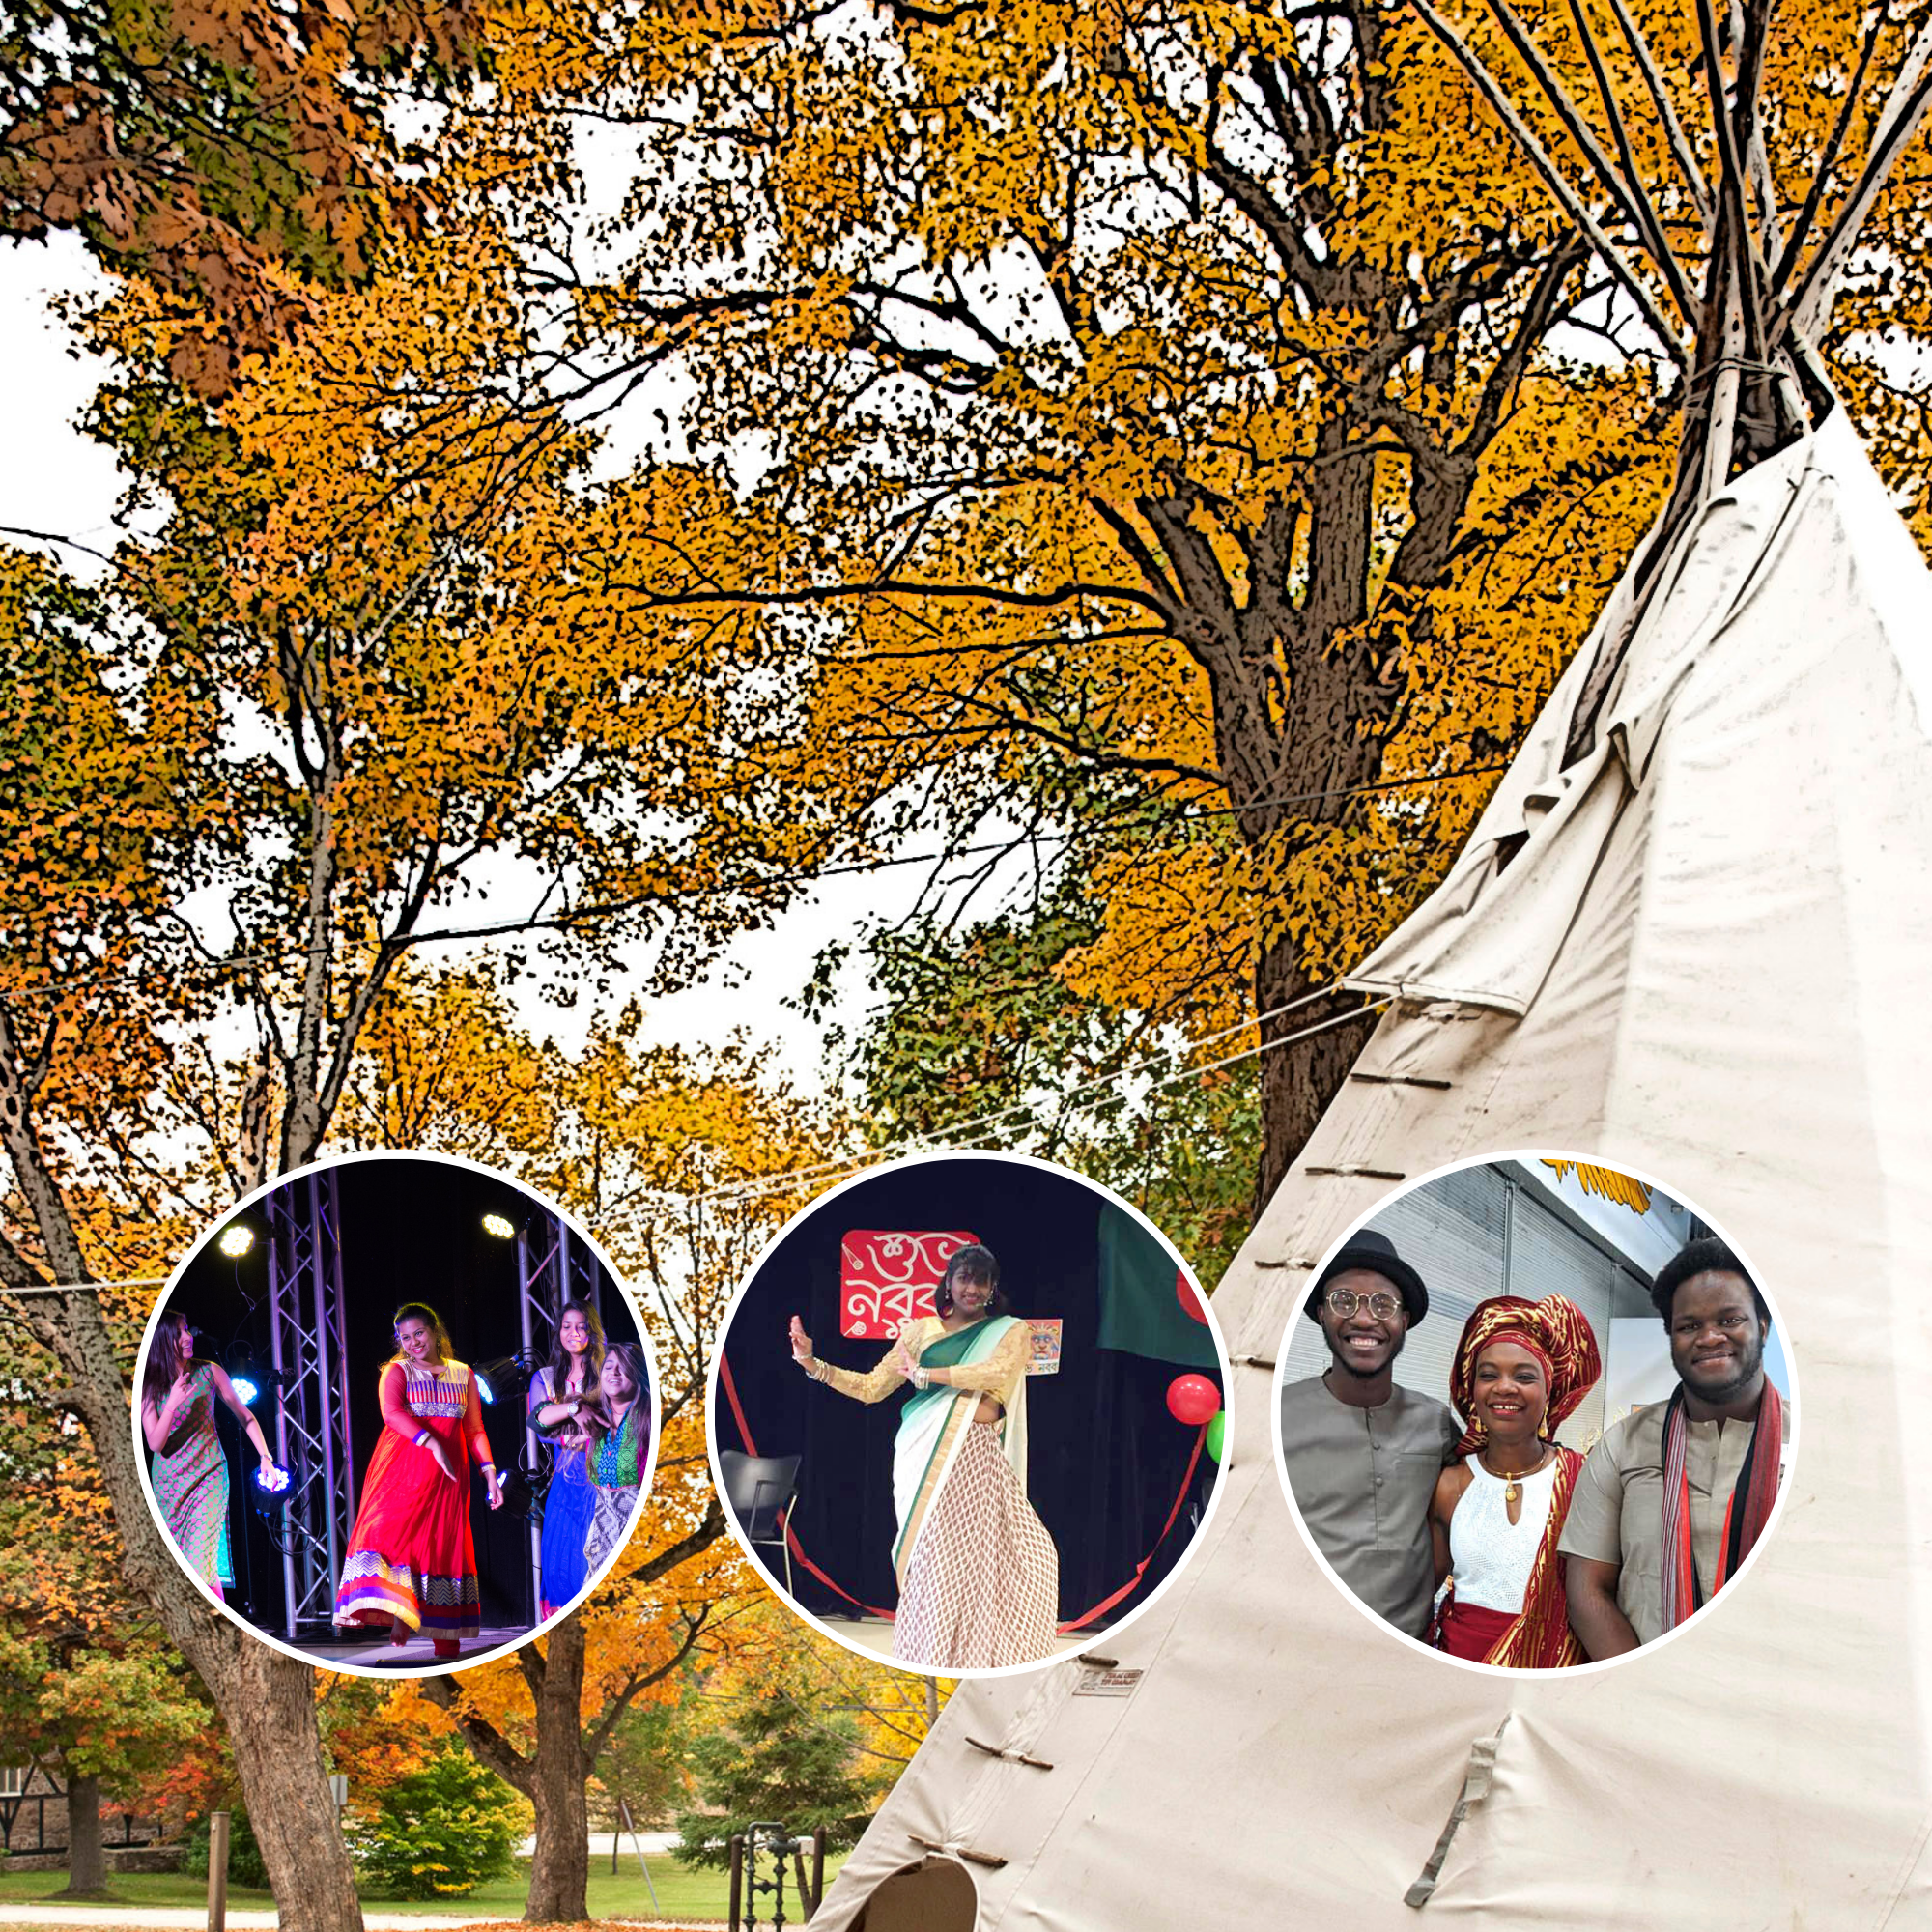 tipi in the fall